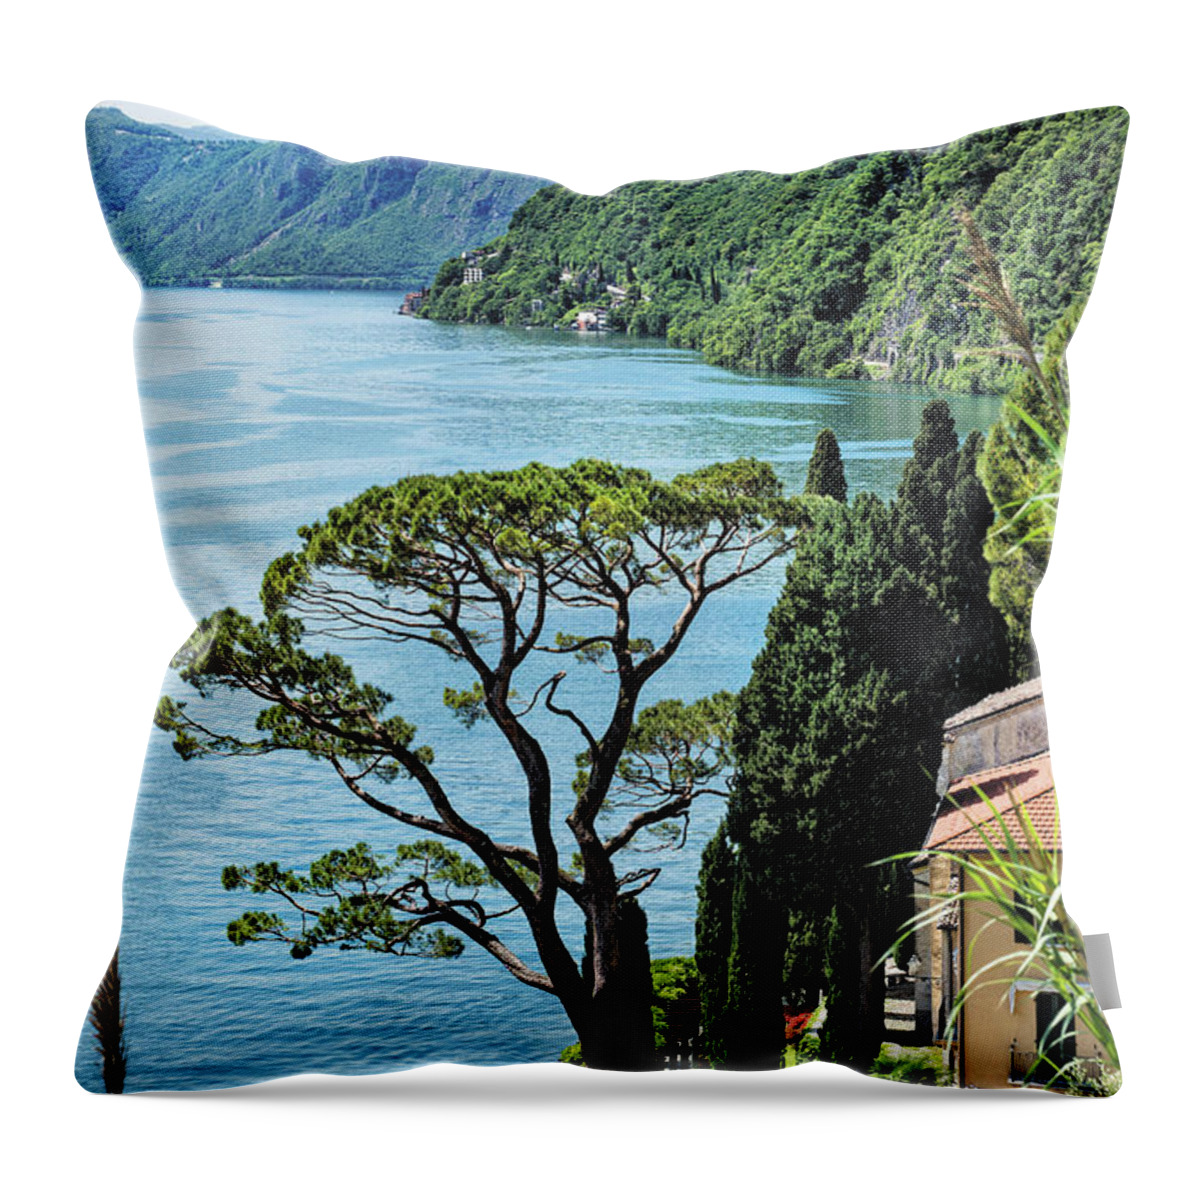 Estock Throw Pillow featuring the digital art Italy, Lombardy, Como District, Valsolda, Oria Locality, Lugano Lake by Susy Mezzanotte